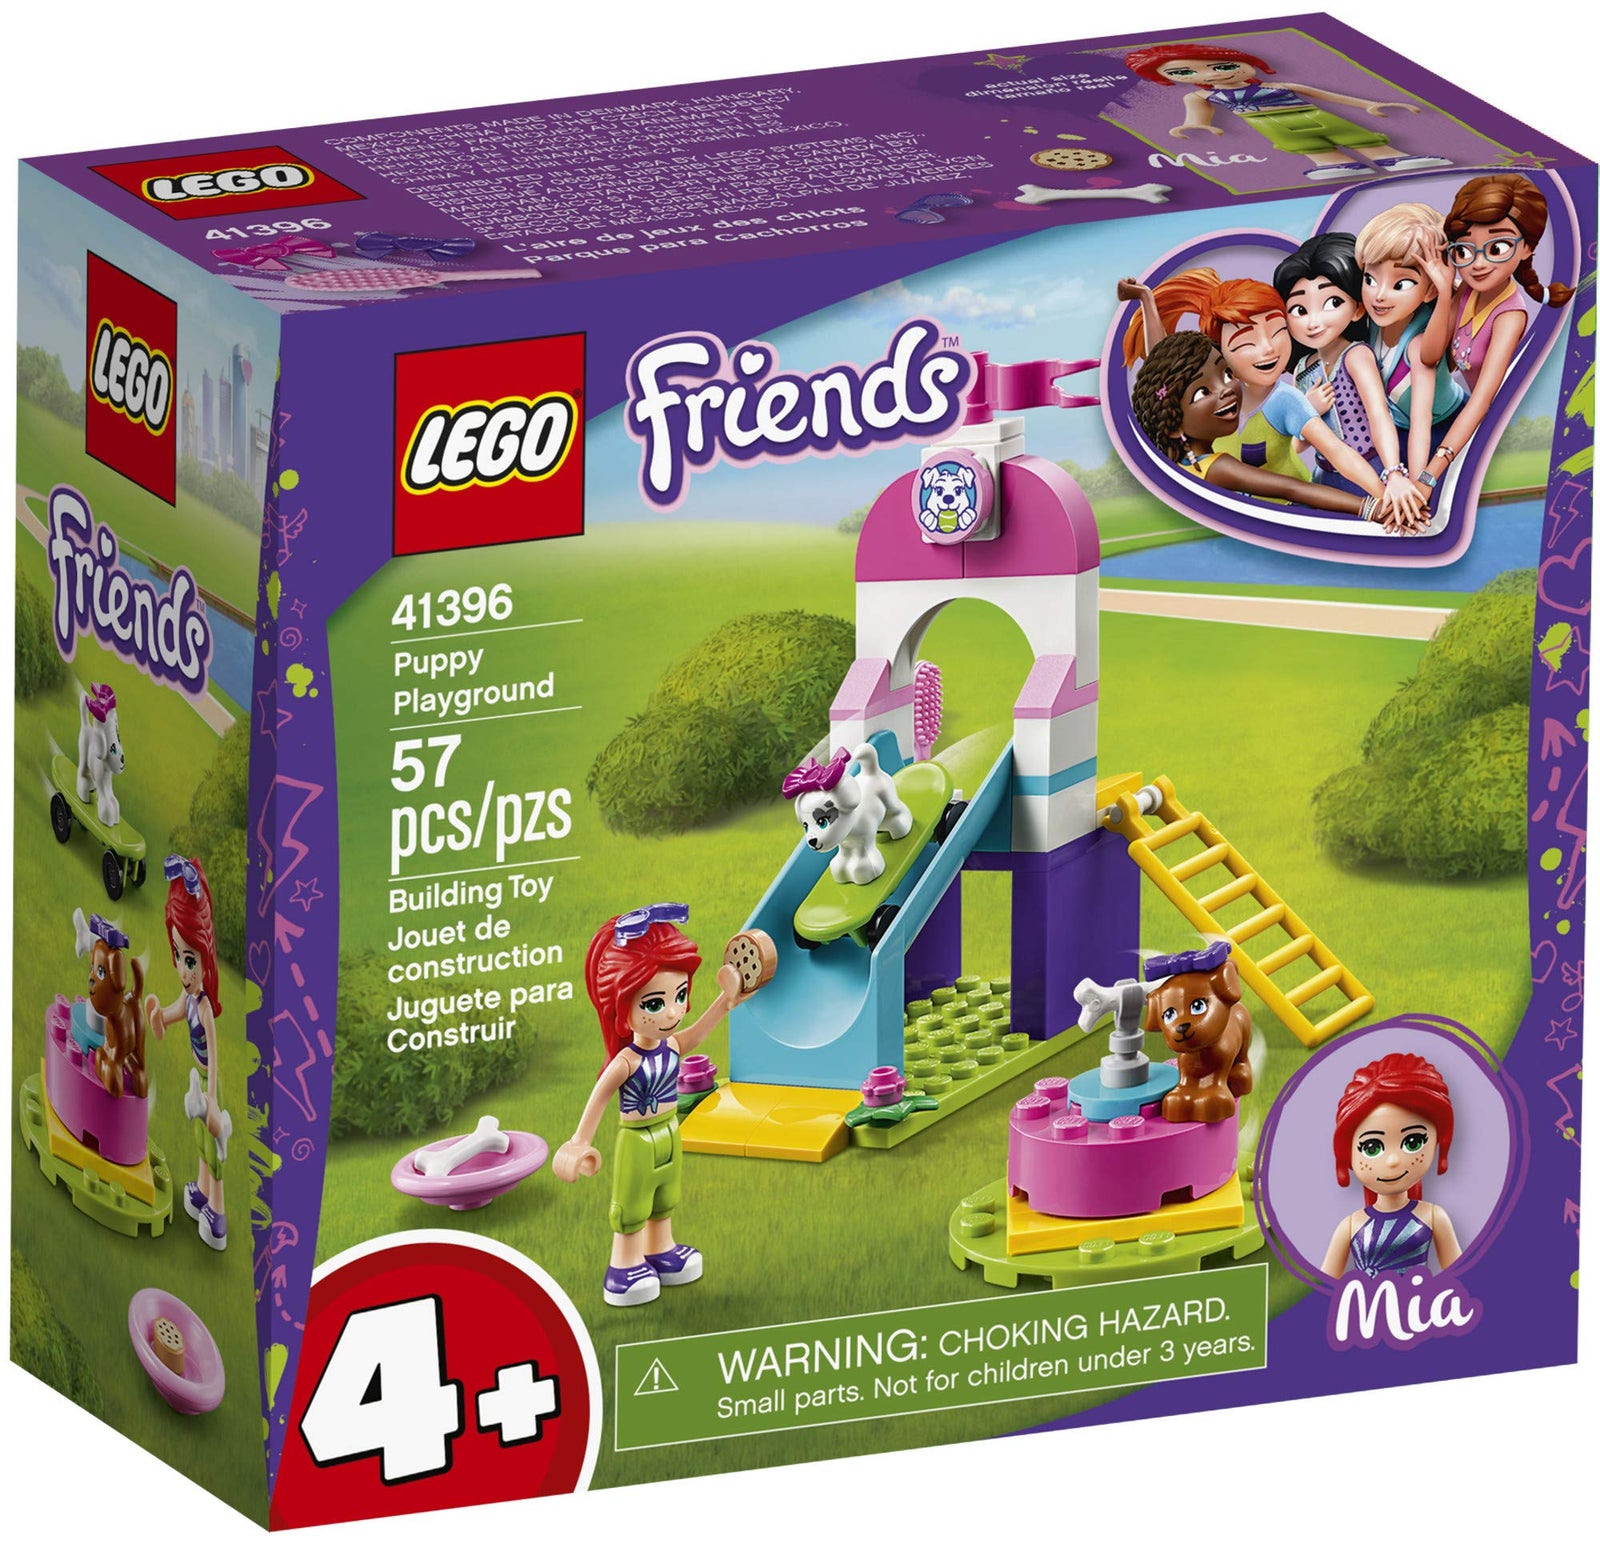 LEGO Friends Puppy Playground 41396 Starter Building Kit; Best Animal Toy Featuring Friends Character Mia (57 Pieces)